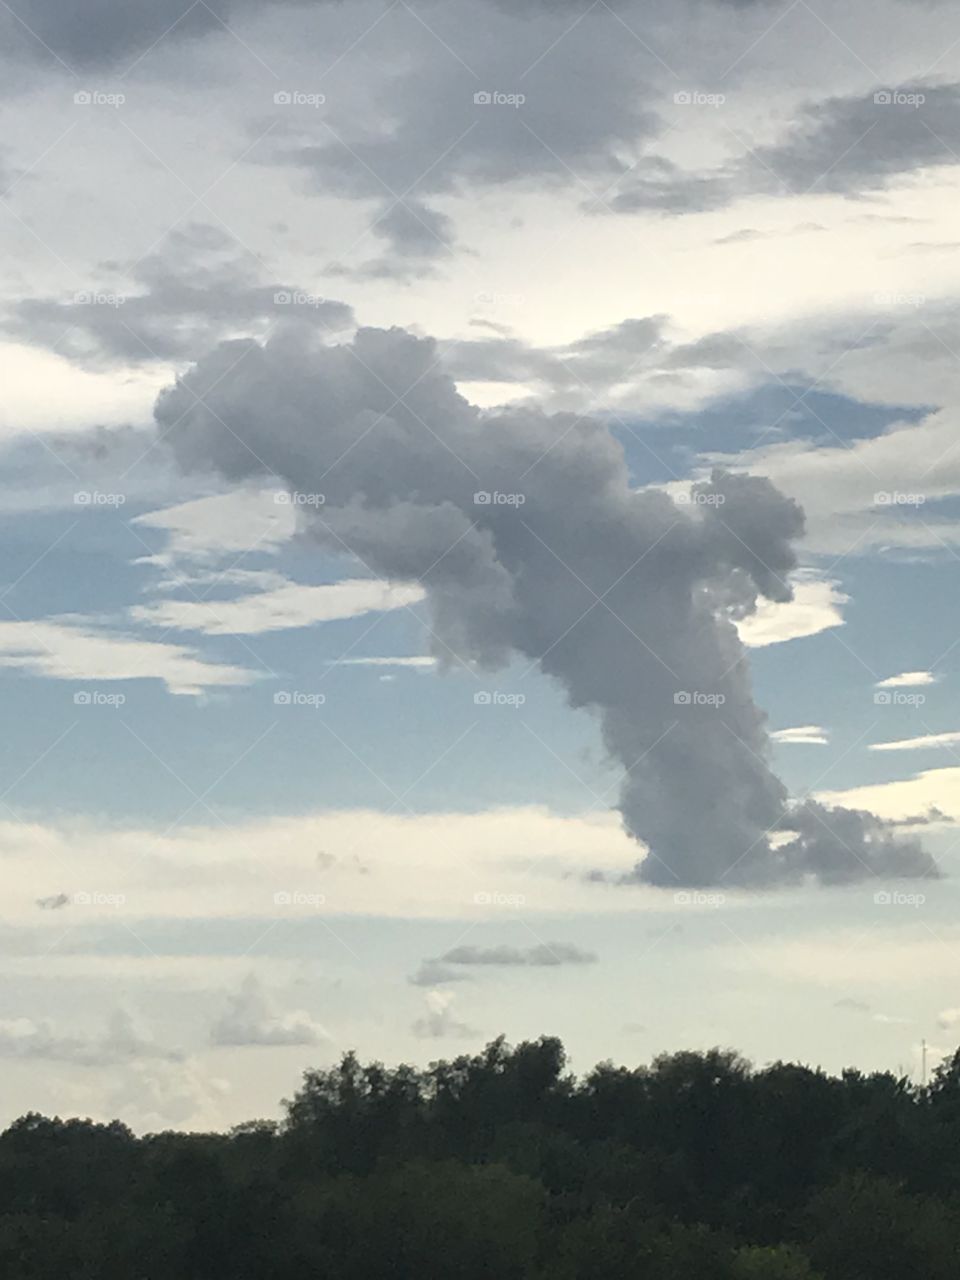 What do you see in the clouds 